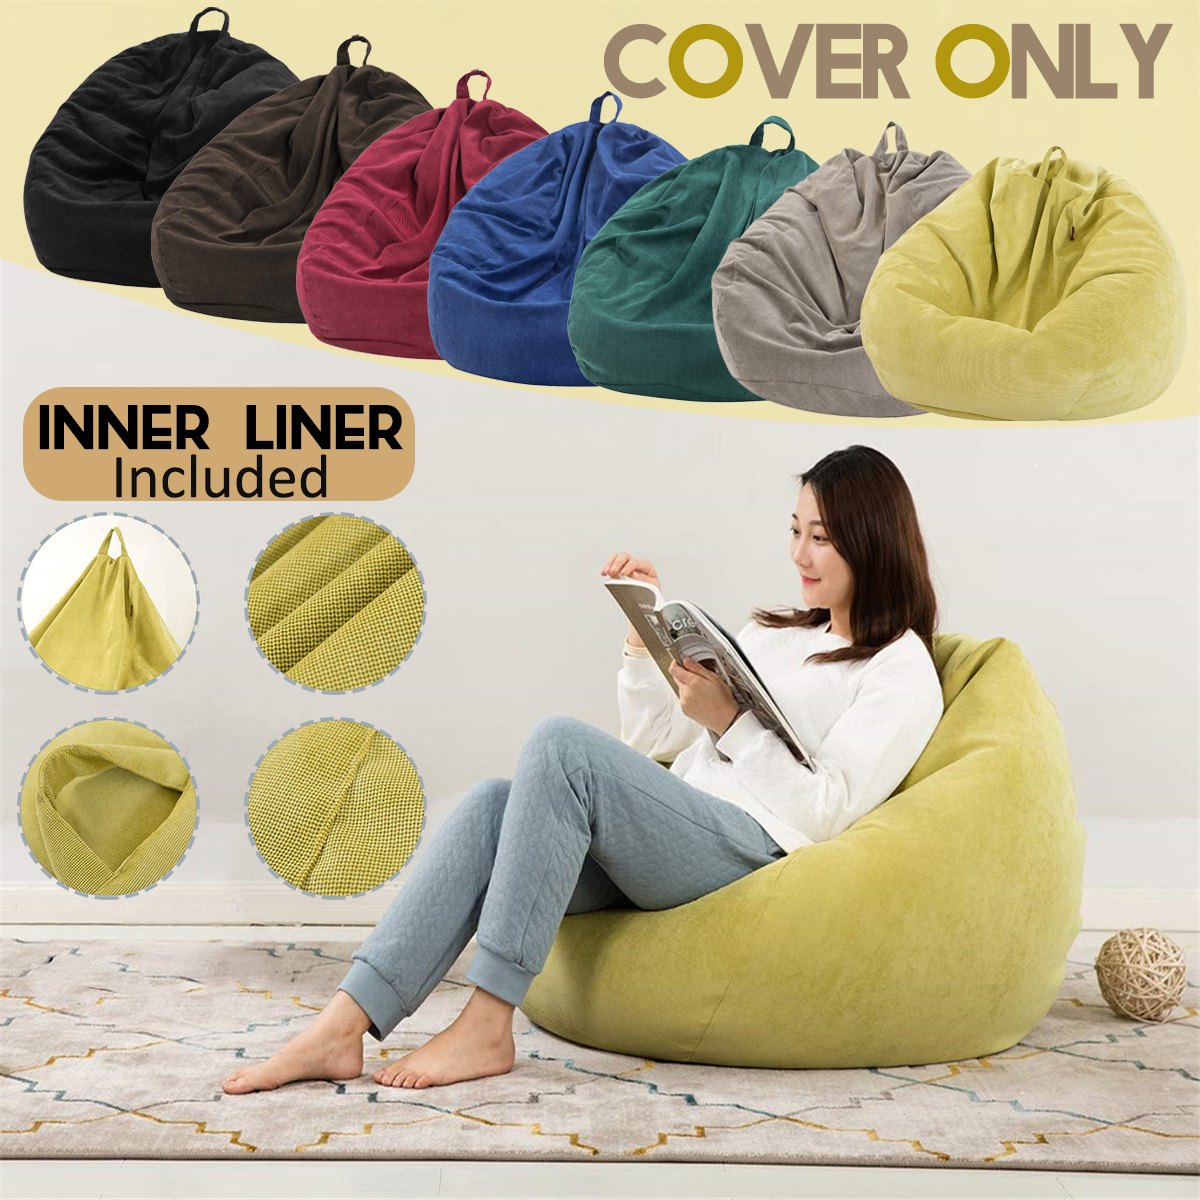 Corduroy Bean Bag Chair 70*80cm Multicolor Gaming Sofa Cover Indoor Lazy Sofa With Mesh Bag Liner Cover 1